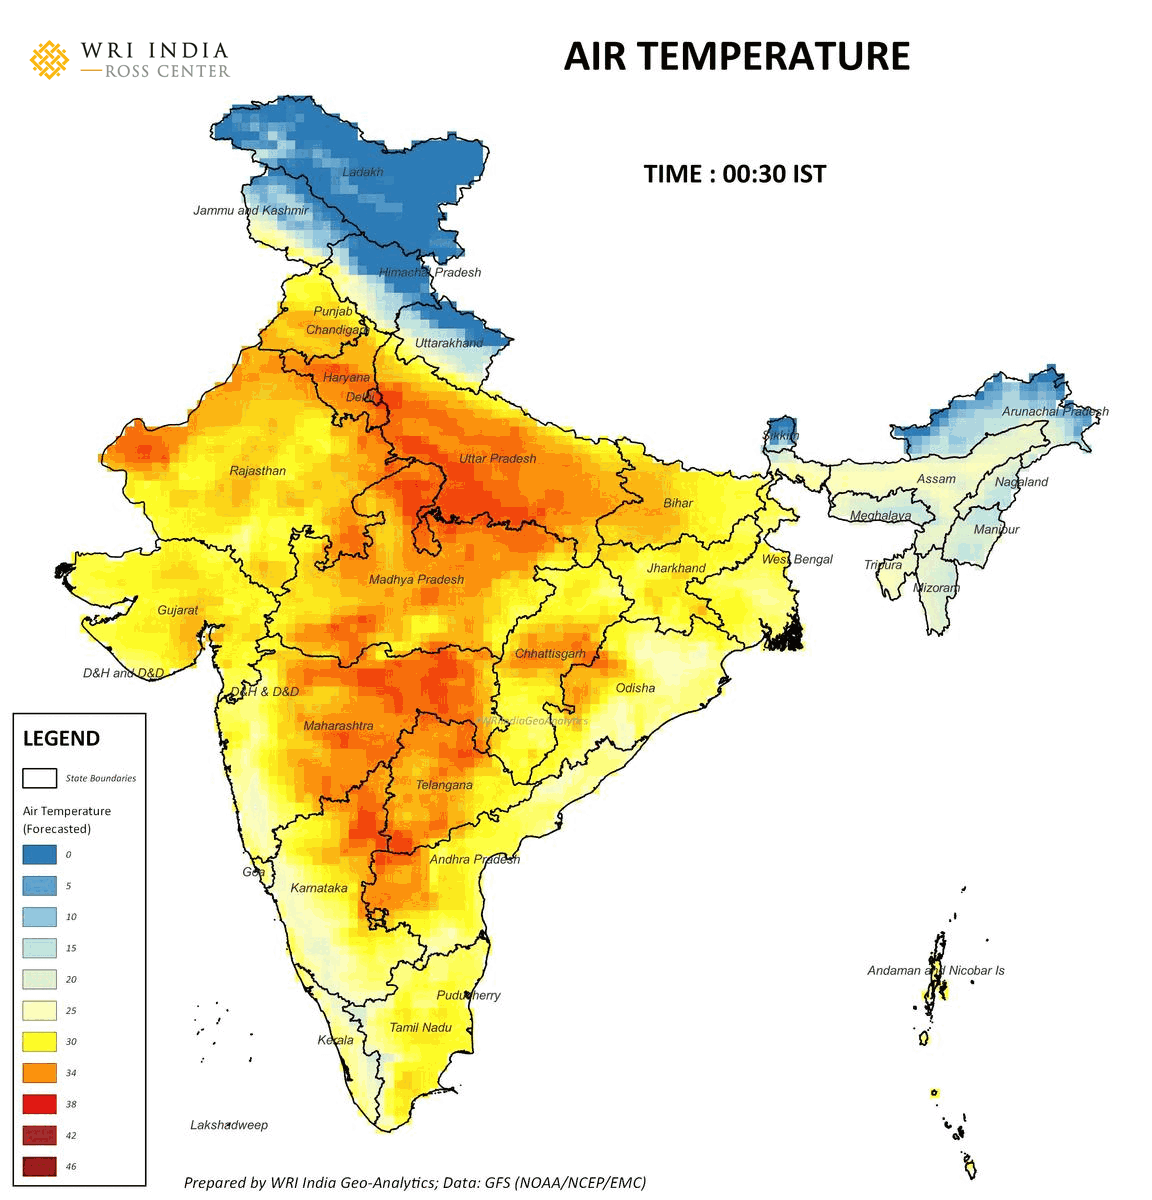 Measuring and Mapping a Heatwave | WRI INDIA